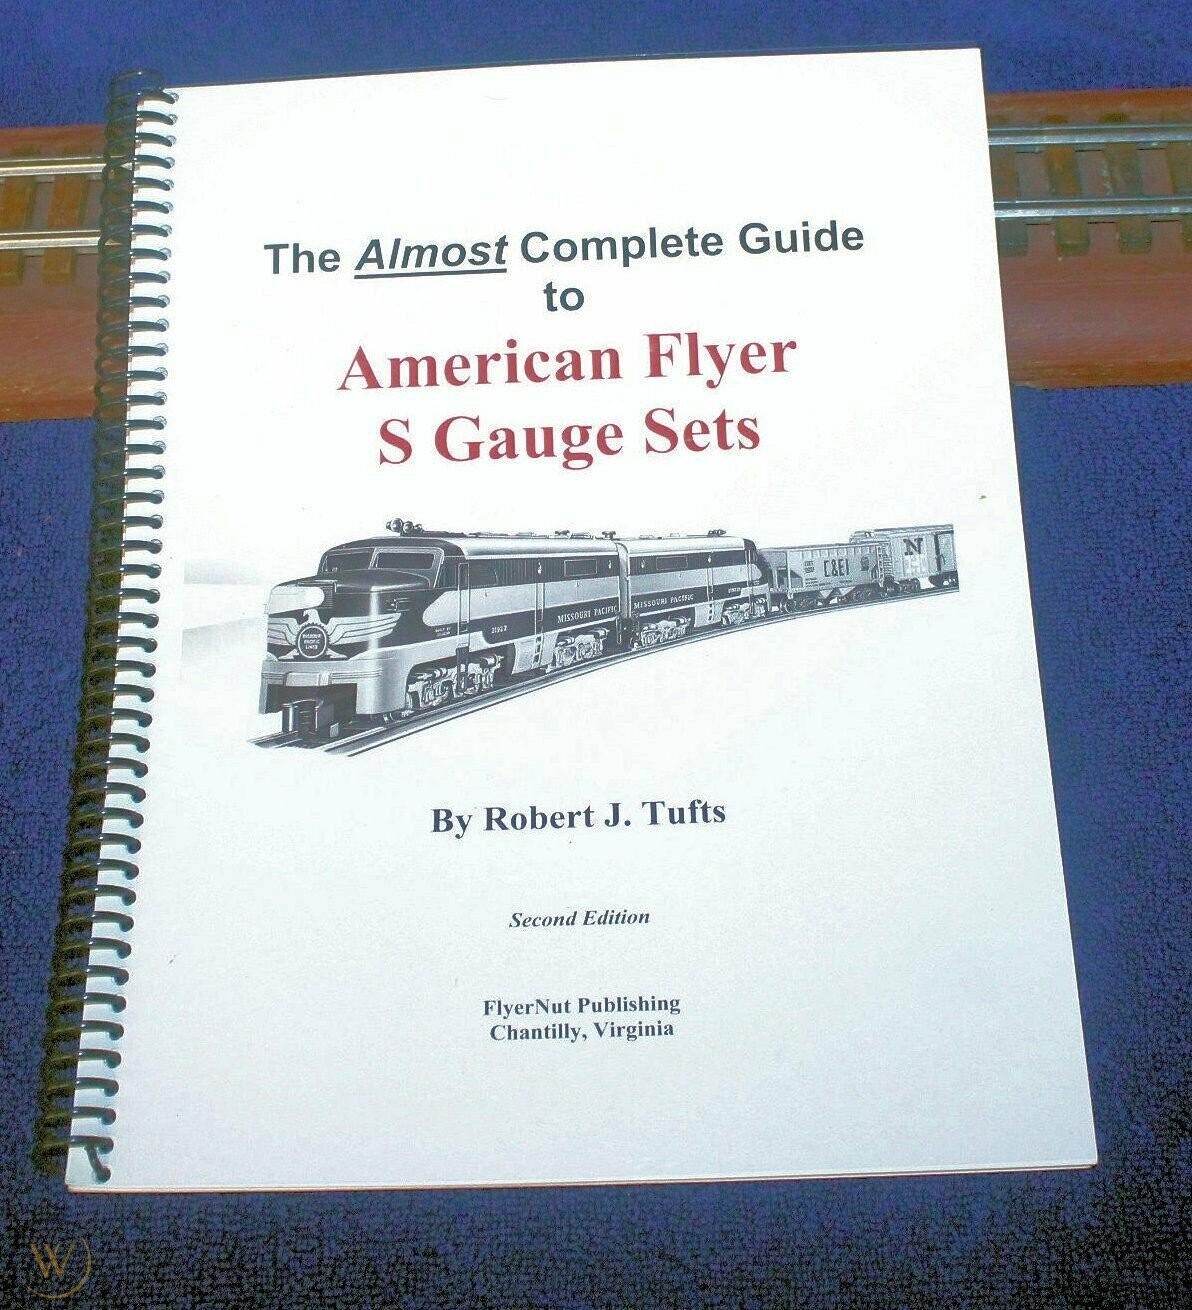 "The ALMOST Complete Guide to American Flyer S Gauge Sets", by Bob Tufts; 2nd edition. spiral-bound softcover; New